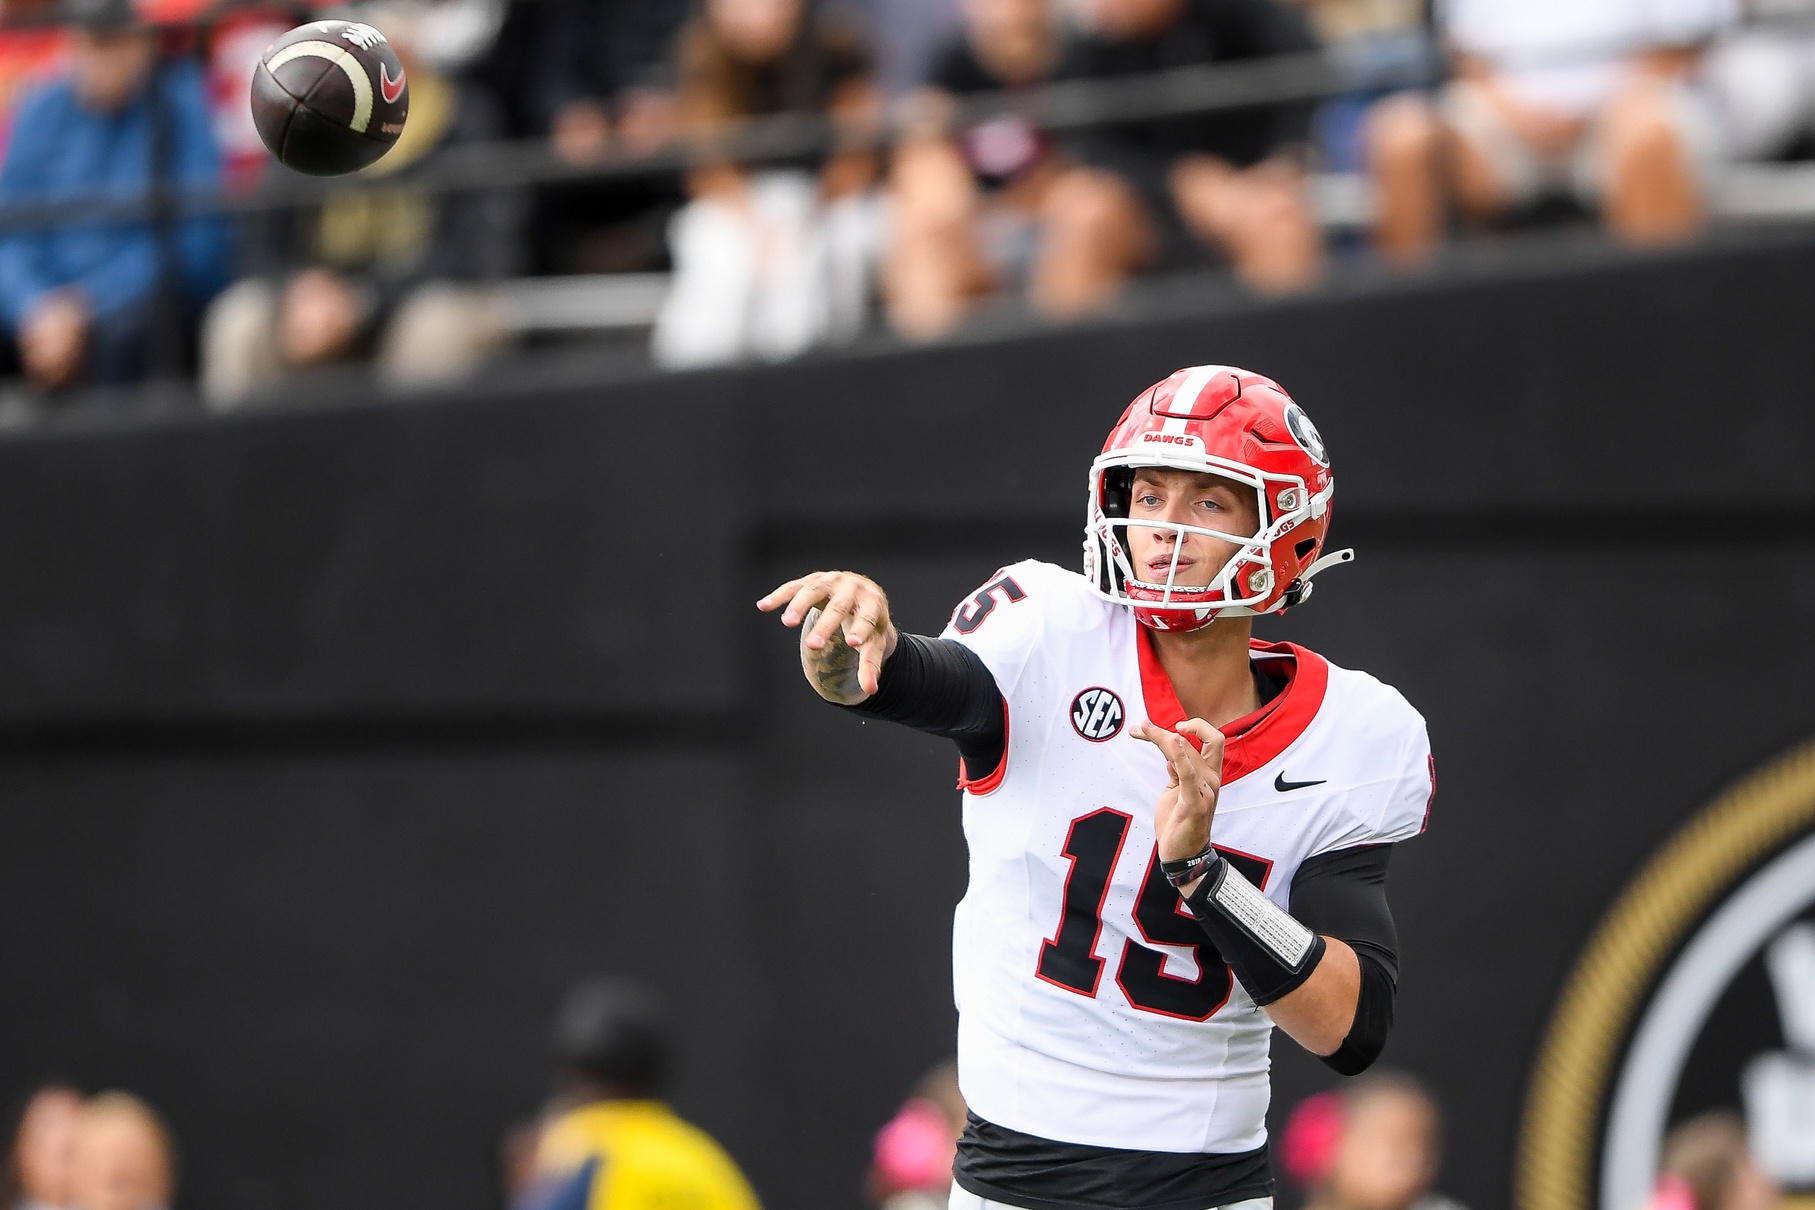 Georgia Bulldogs quarterback Carson Beck (15) throws a pass against the Vanderbilt Commodores during the second half at FirstBank Stadium.